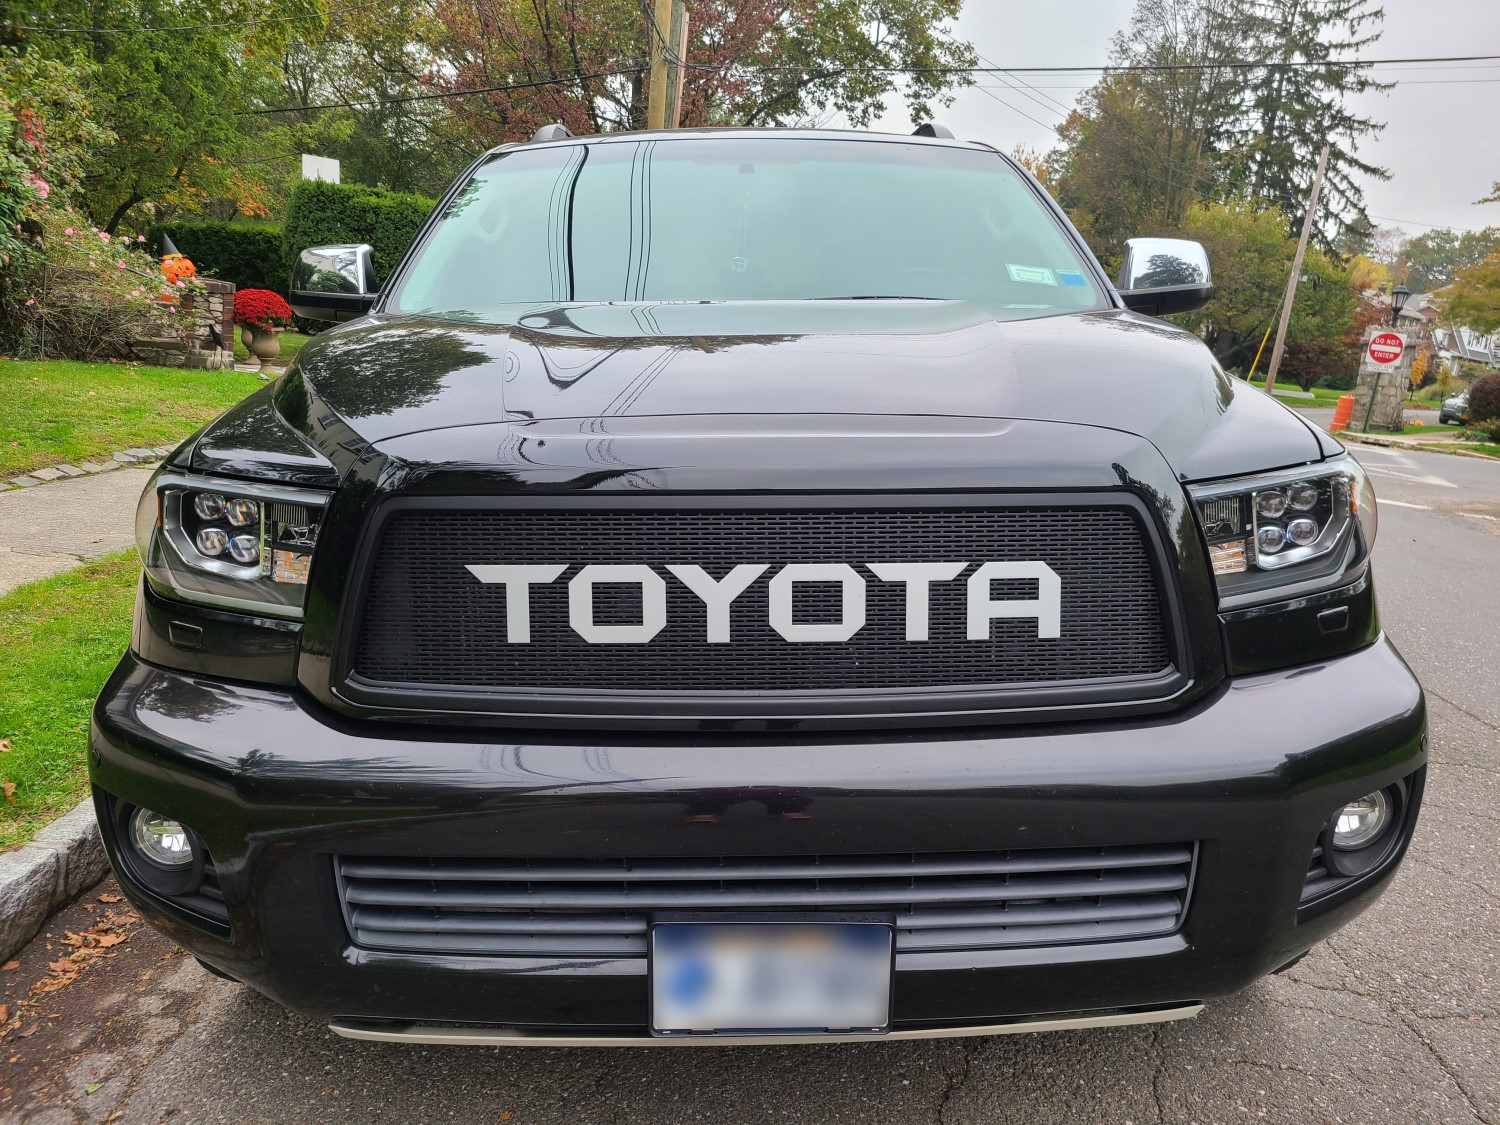 2008-17 Toyota Sequoia Mesh Grill Insert with Big Letters by